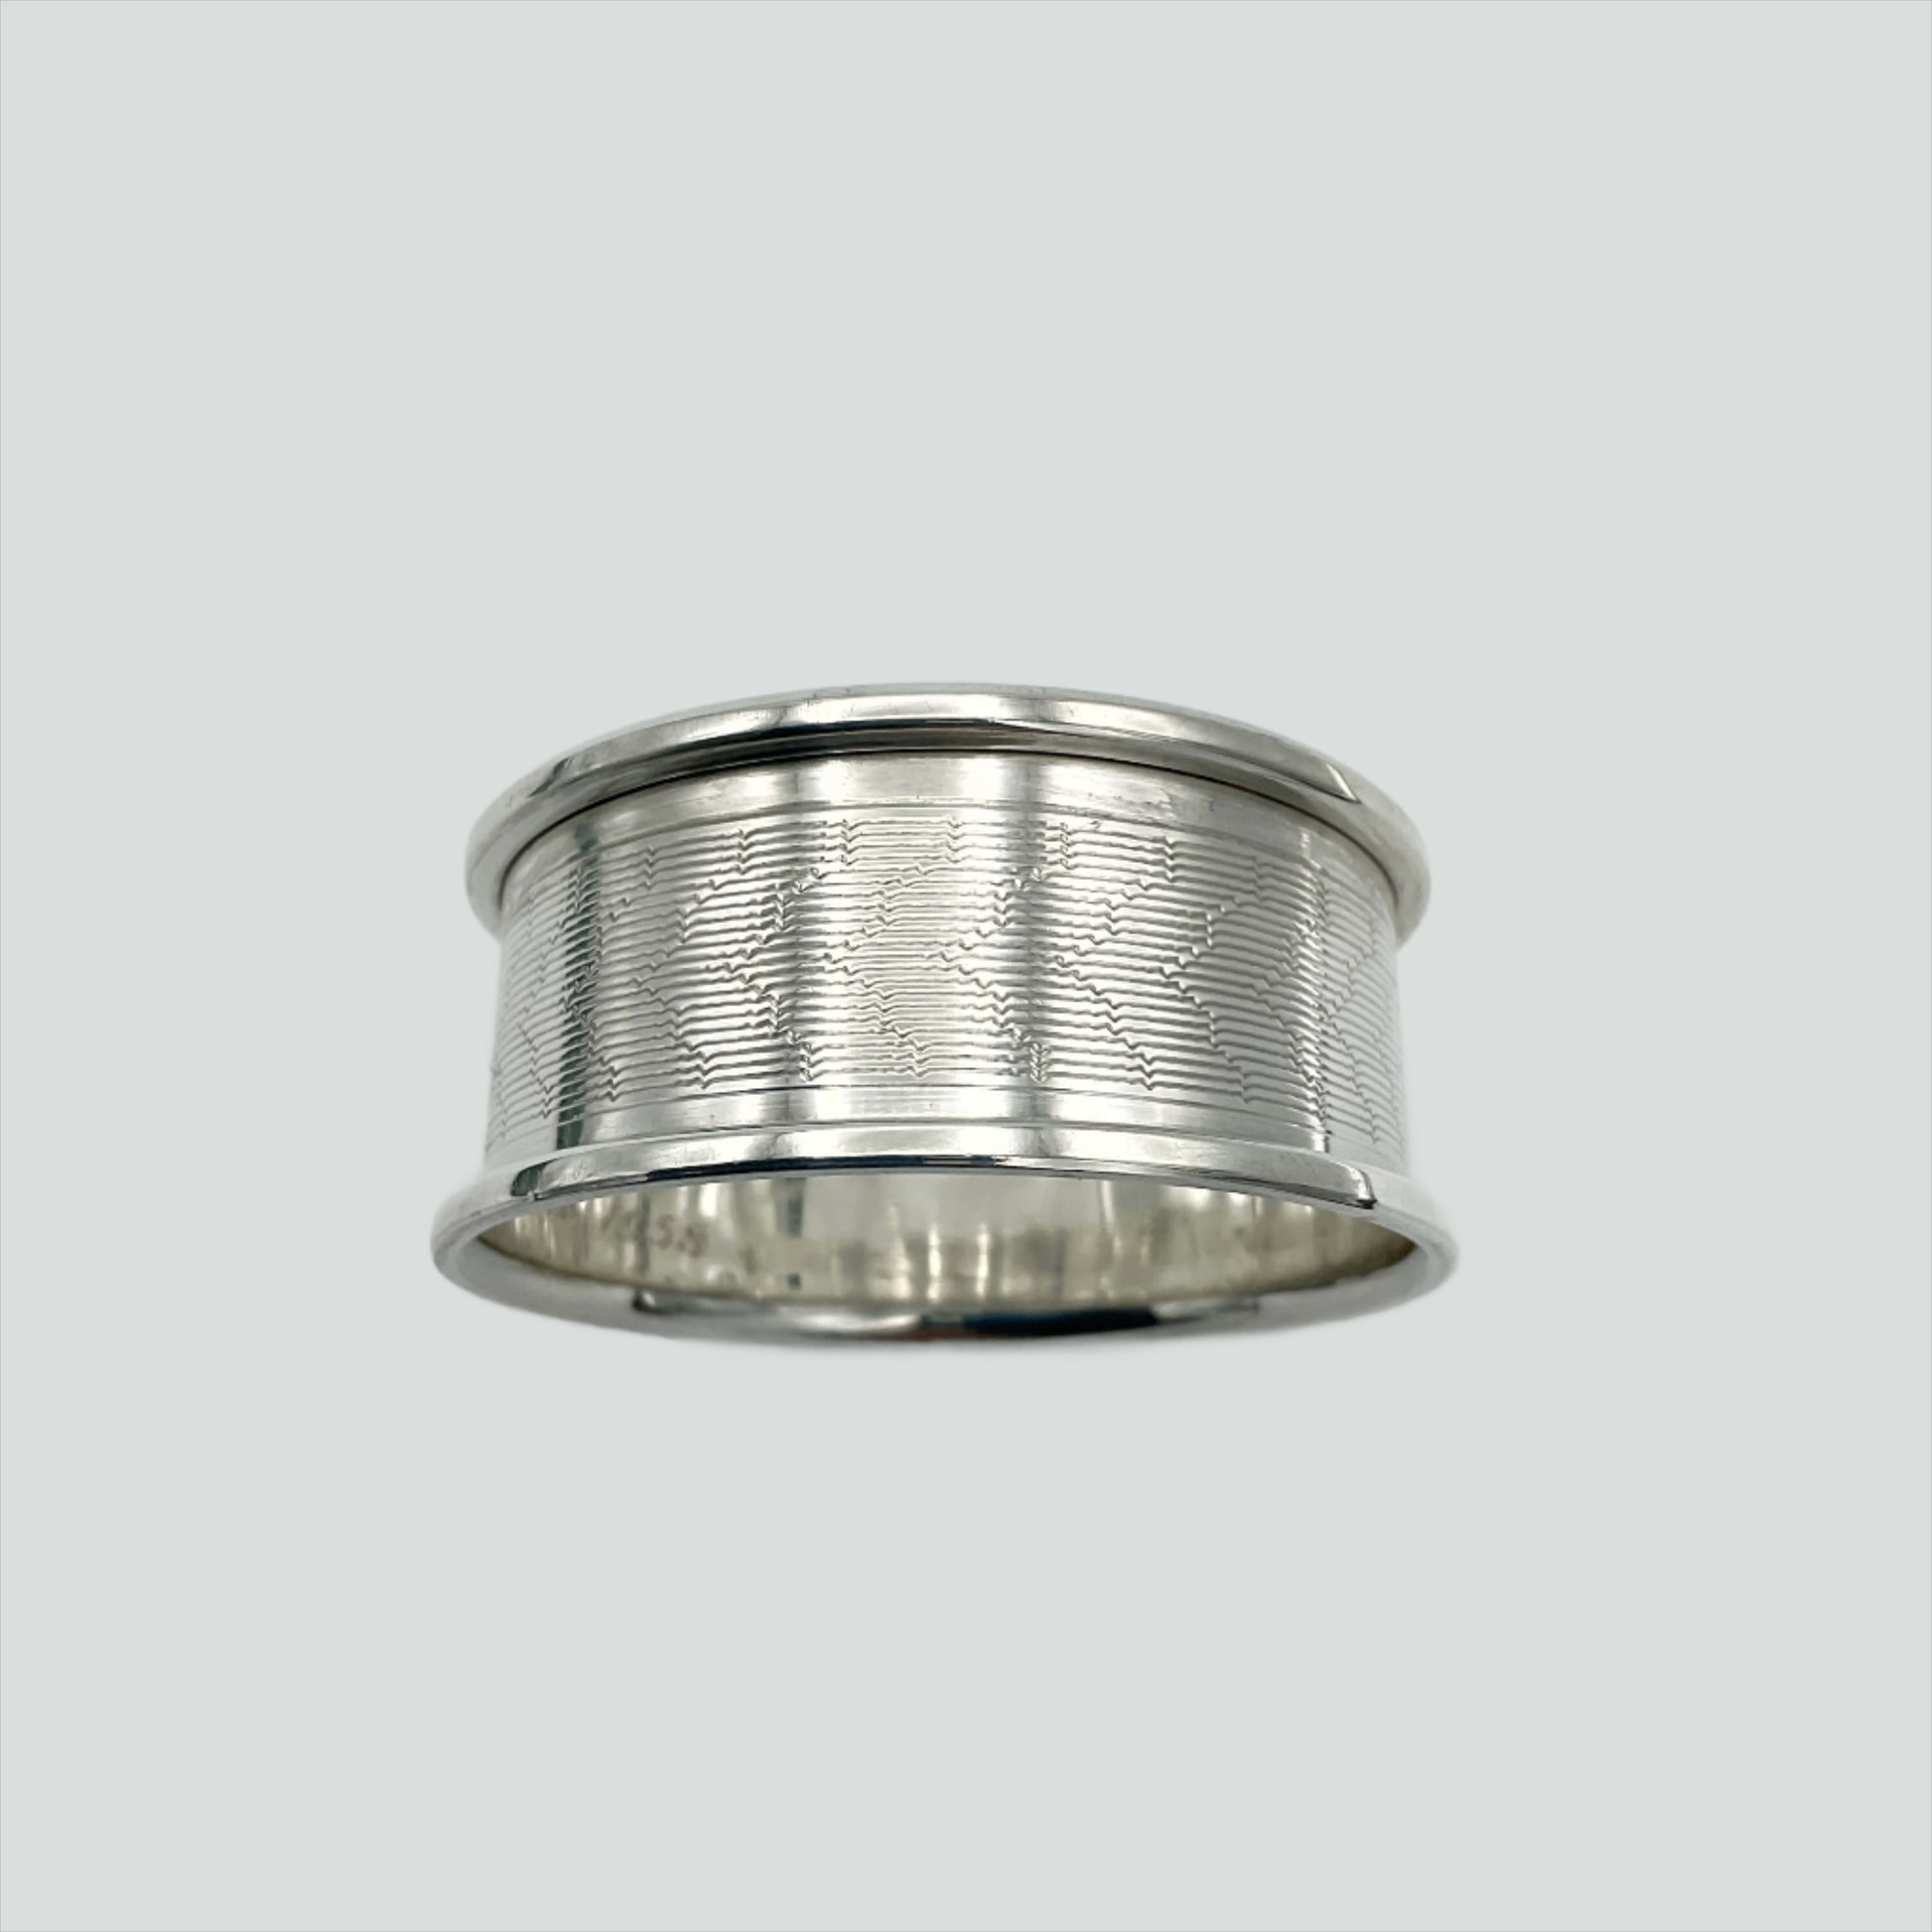 Silver napkin ring with a pretty engraved design on a plain background 